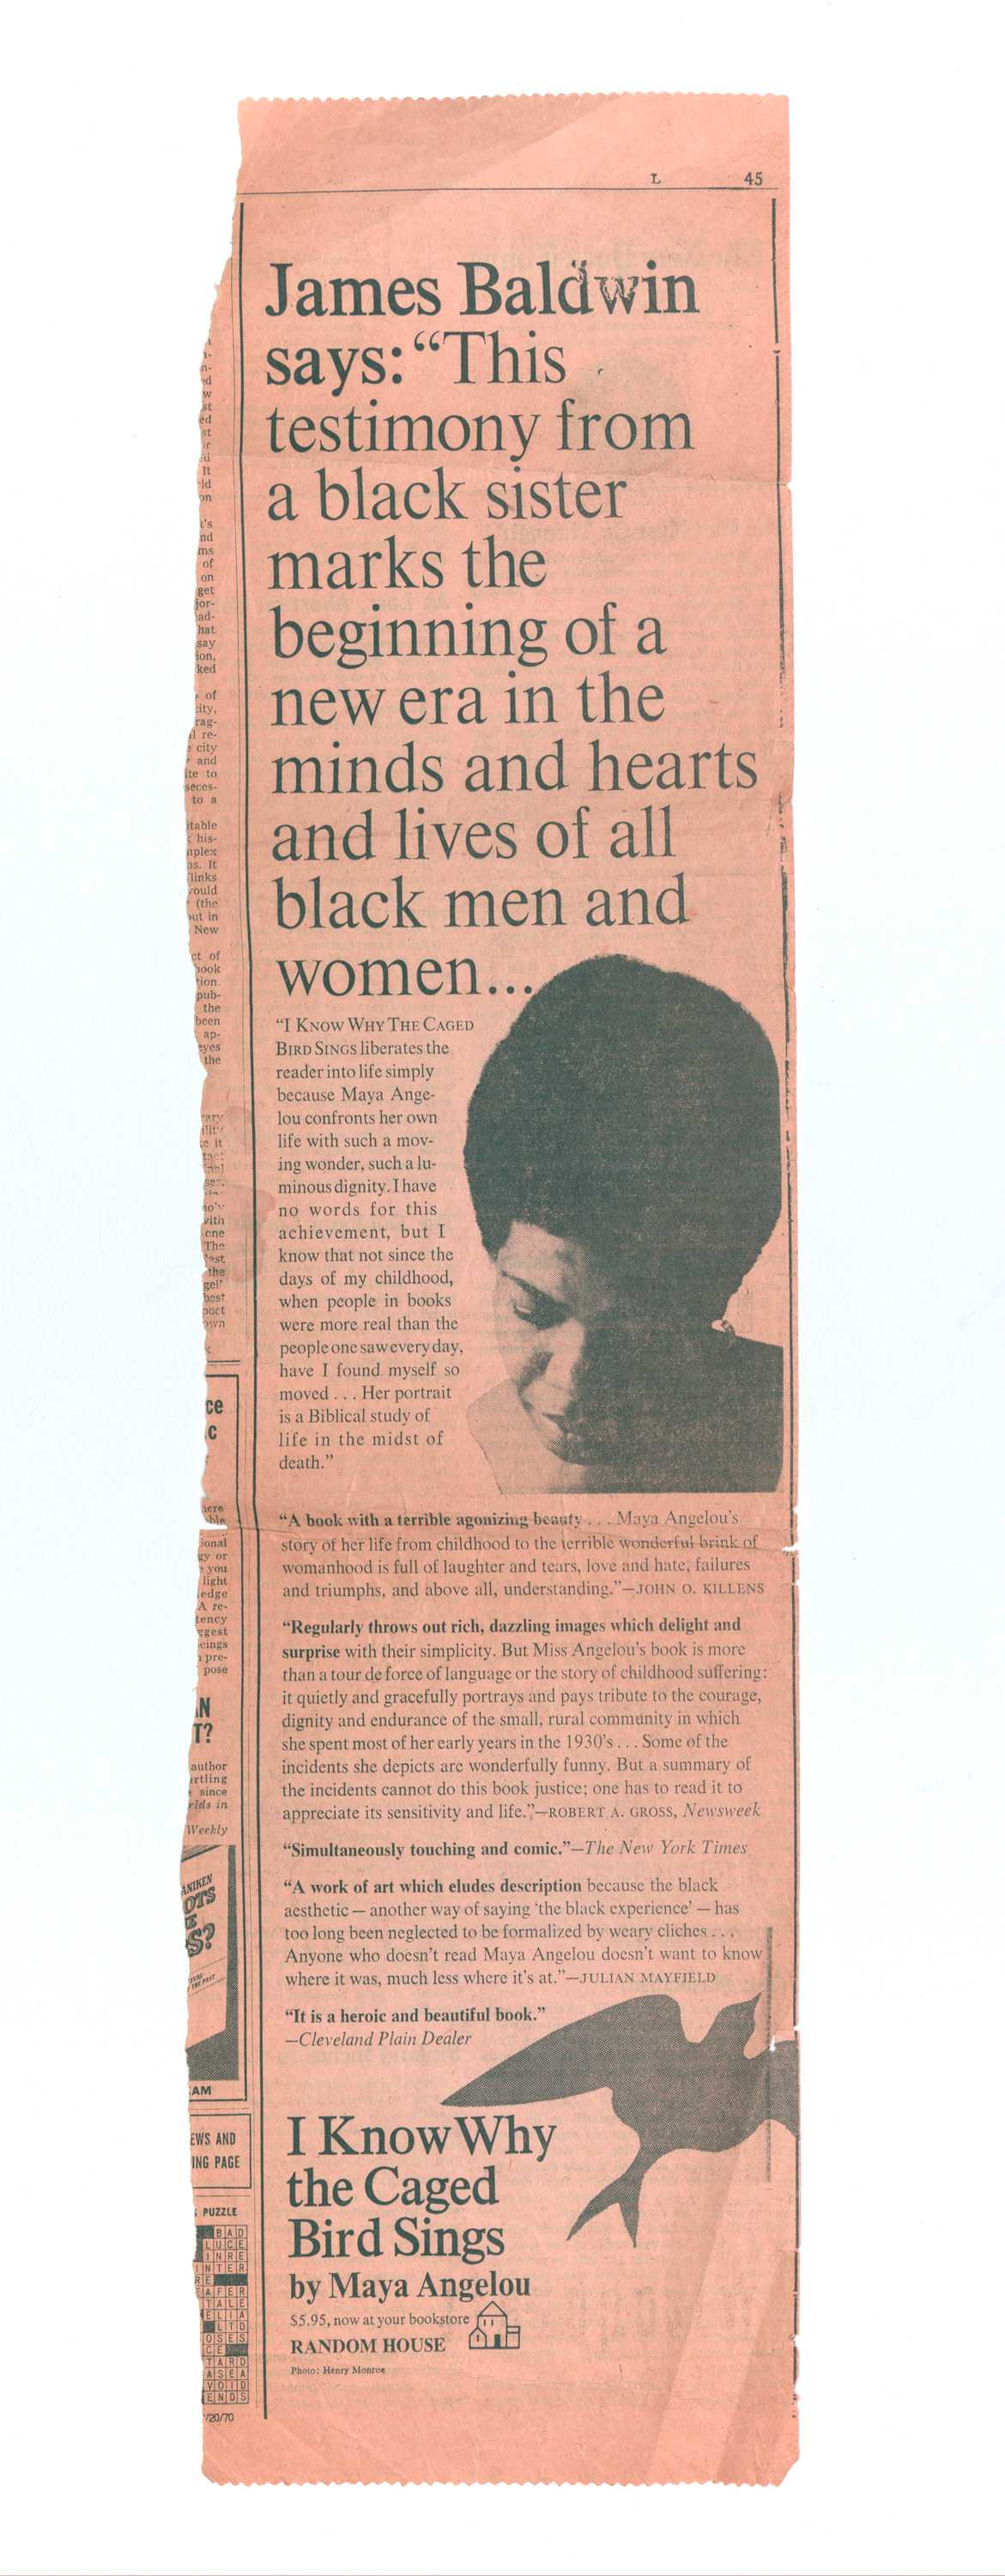 Image of New York Times clipping with reviews of Maya Angelou’s I Know Why the Caged Bird Sings.